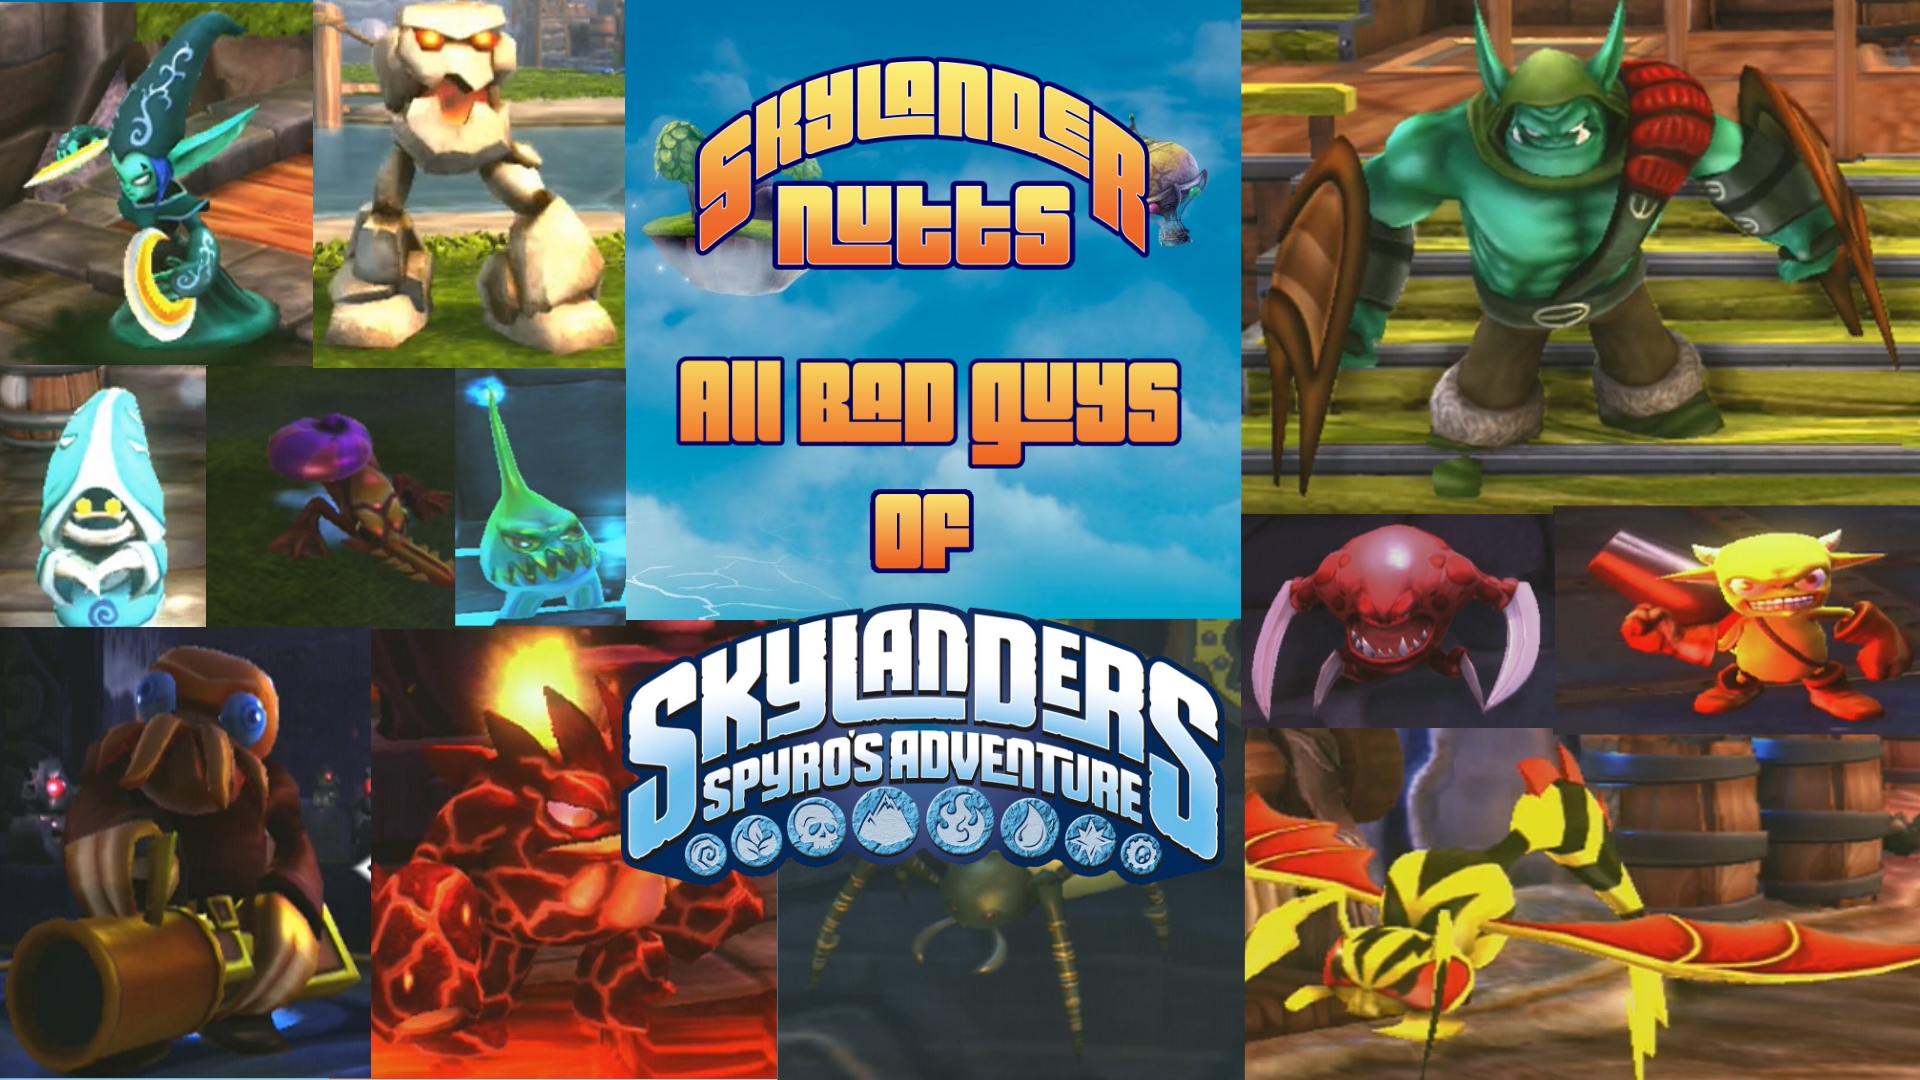 Spyros Adventure - All Named Bad Guys (and More)